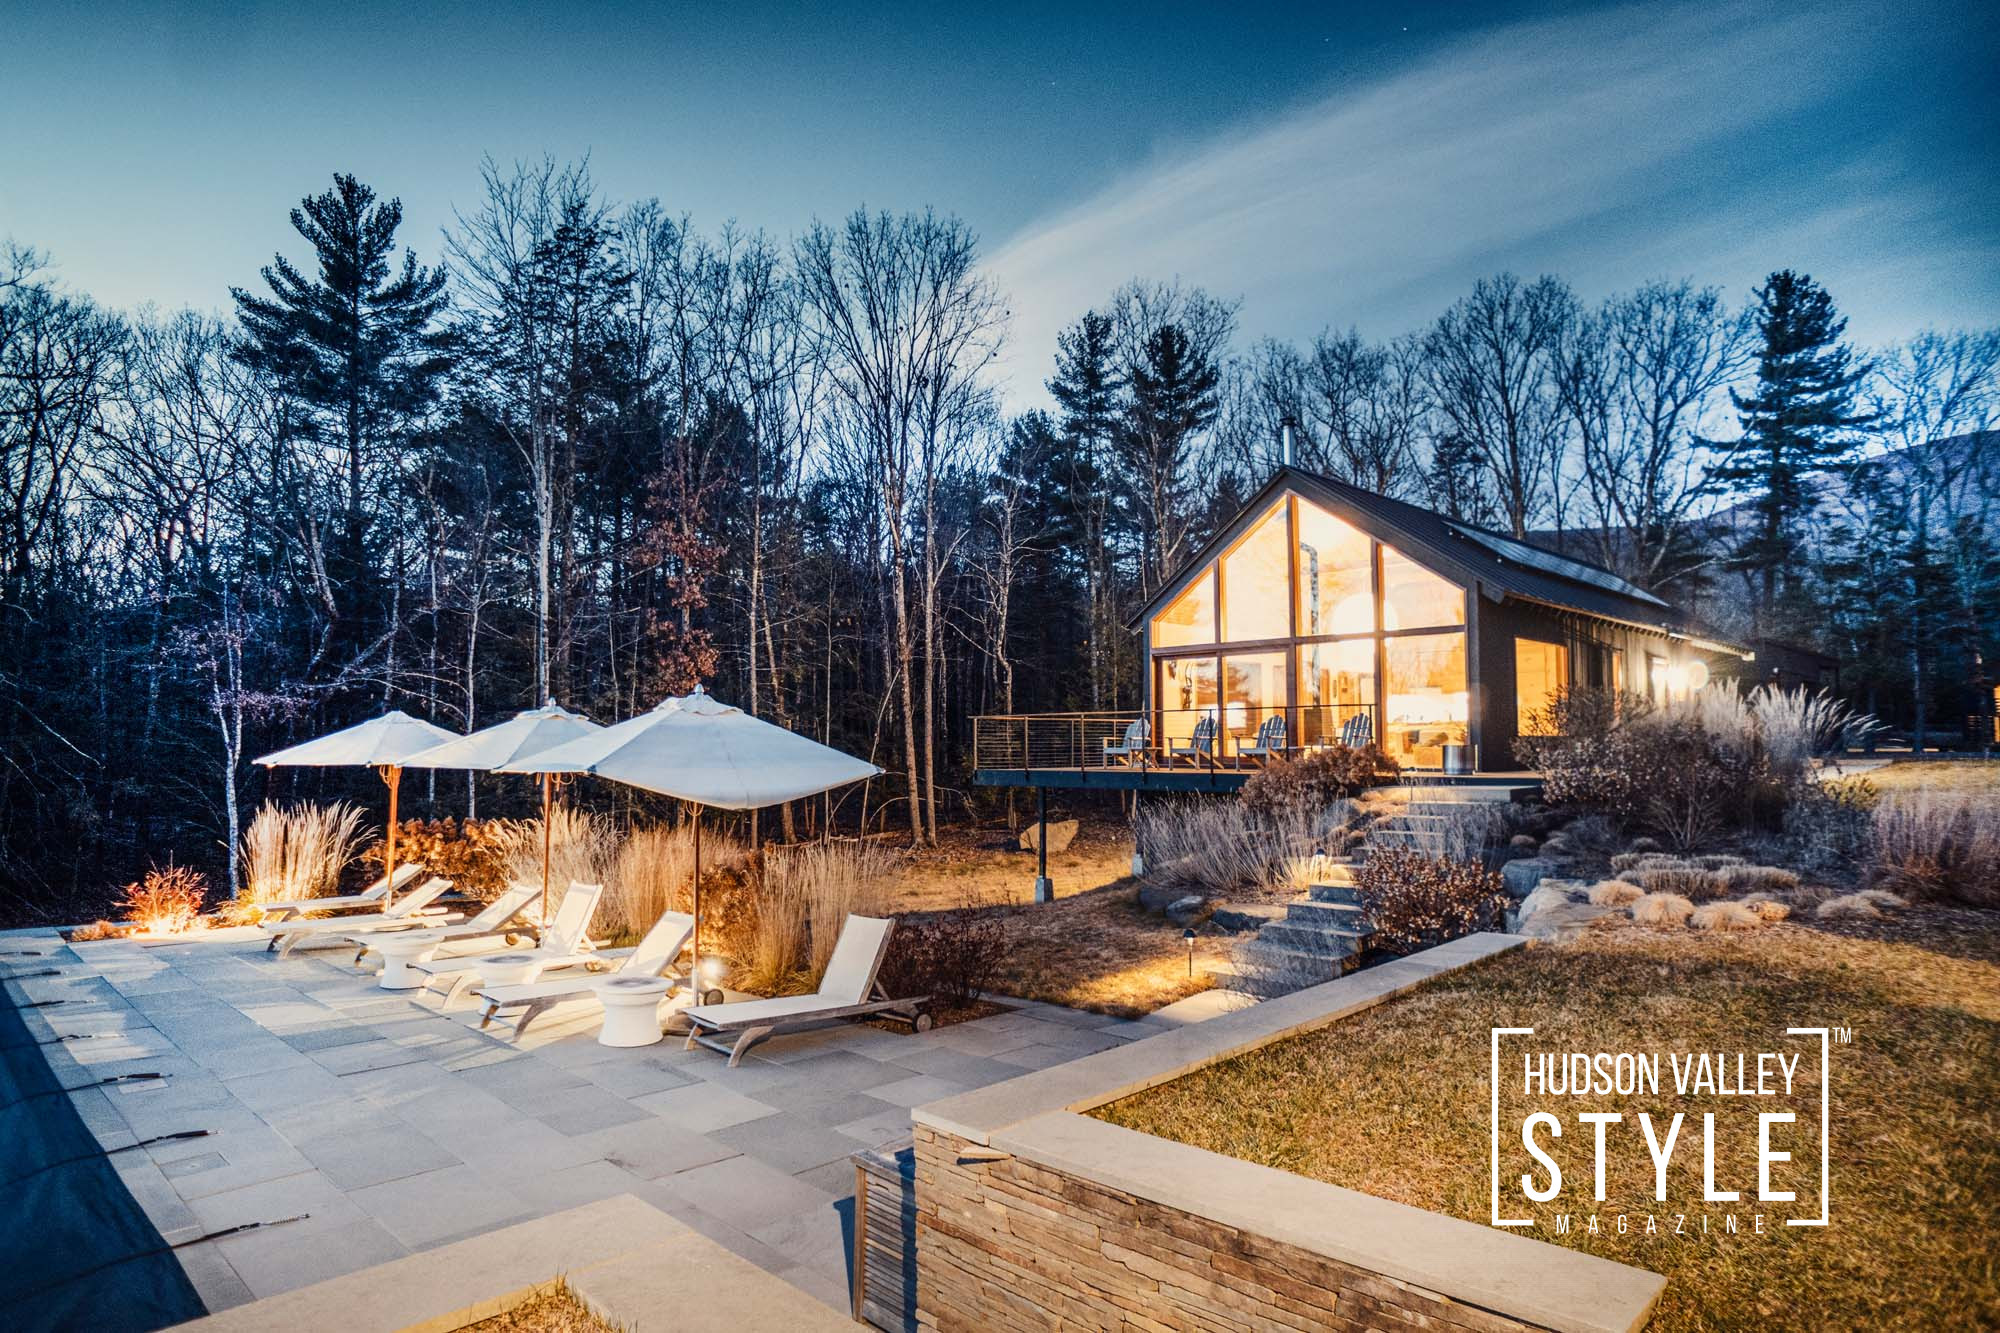 Best Real Estate Photographer in the Hudson Valley and Catskills